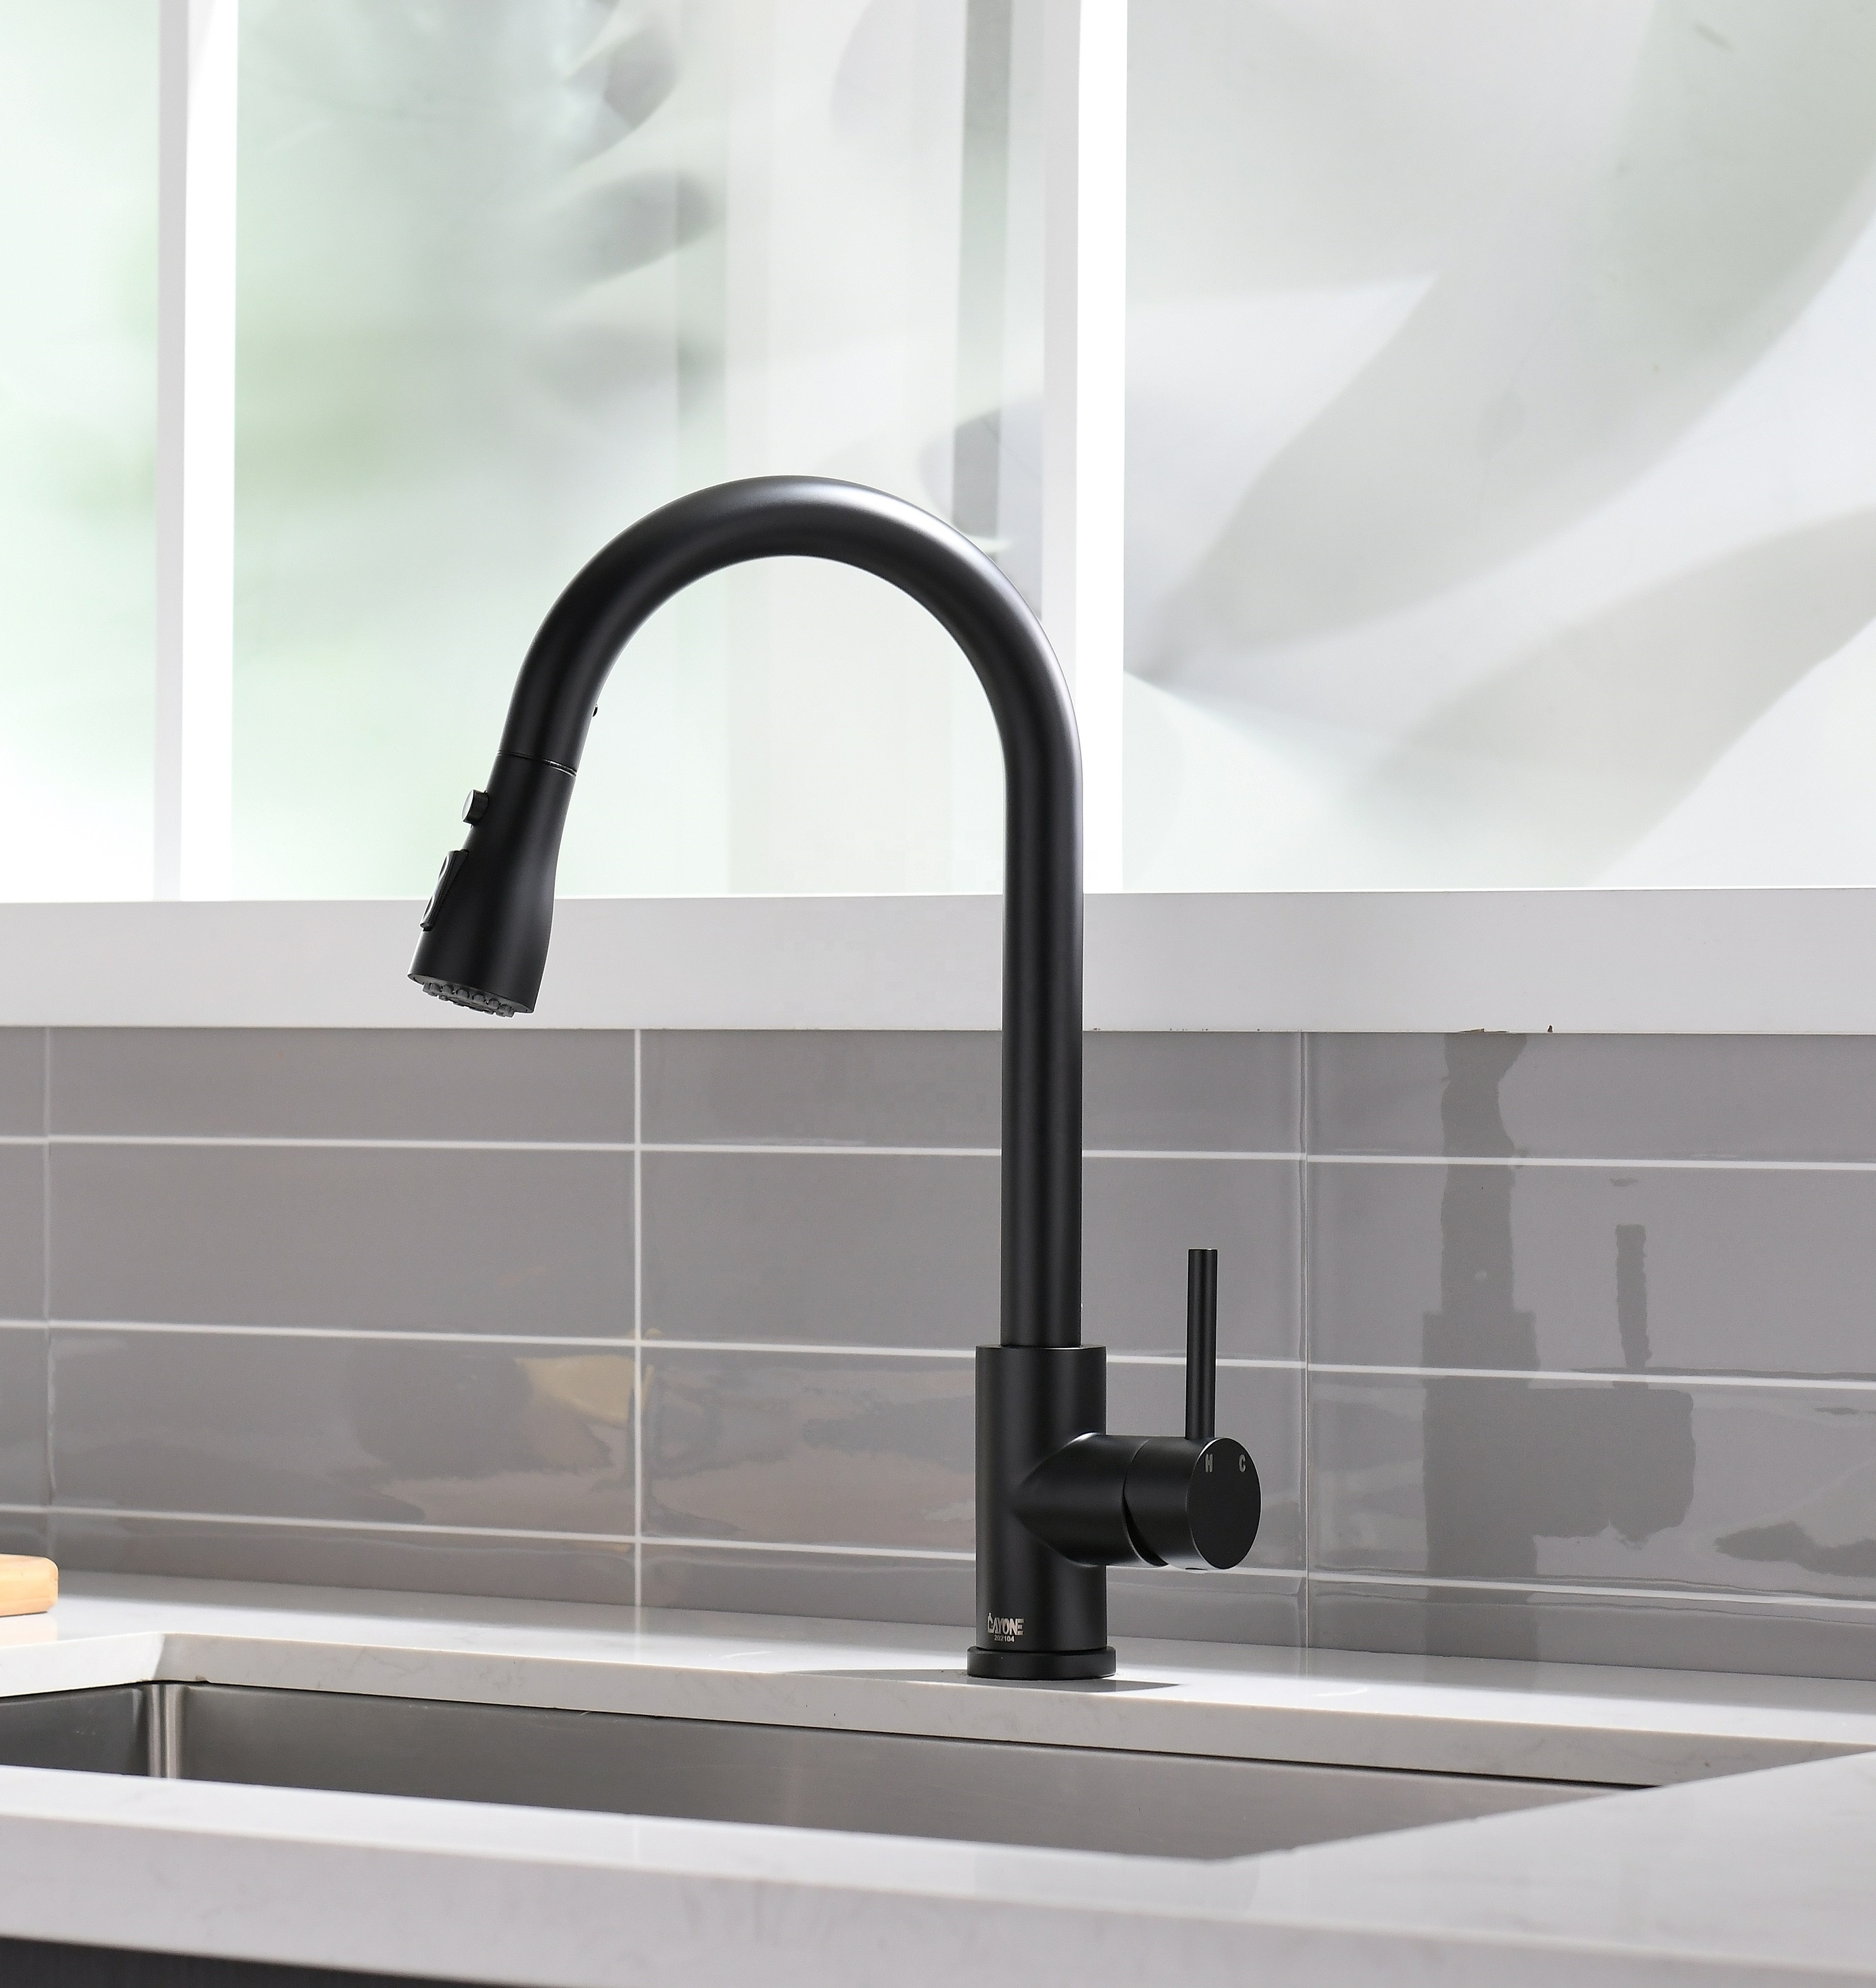 SUS304 Stainless Steel Kitchen Sink Faucet Kitchen Faucet Pull Down Black